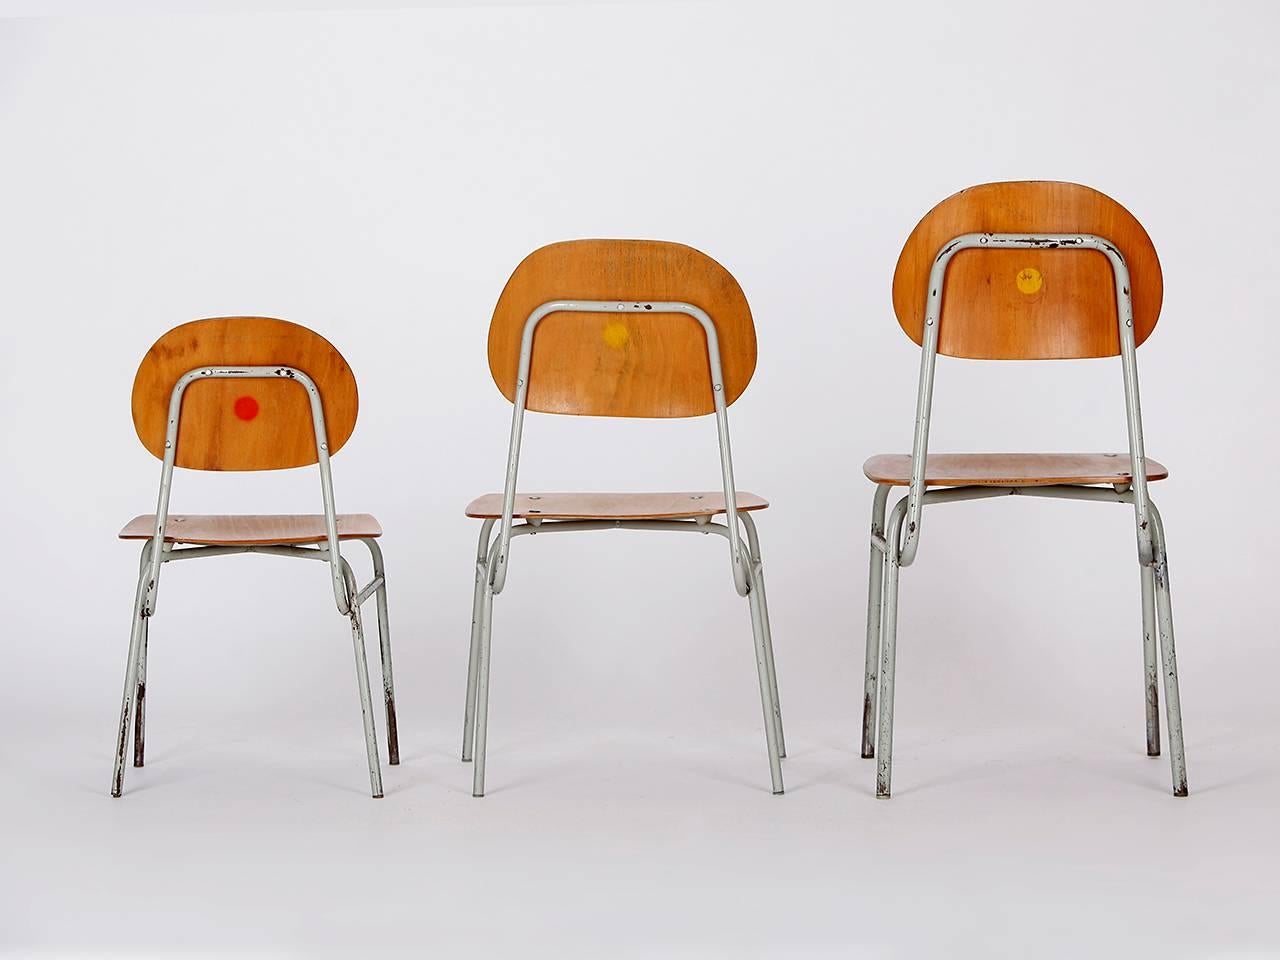 Chairs come from a Czech primary school. Made in the 1960s. Wooden parts have been restored. Steel tube with original paint and patina.
Dimensions: small: height of seat 11 x H 21 x W 12 x D 11 cm
Medium: height of seat 12 x H 25 x W 15 x D 11